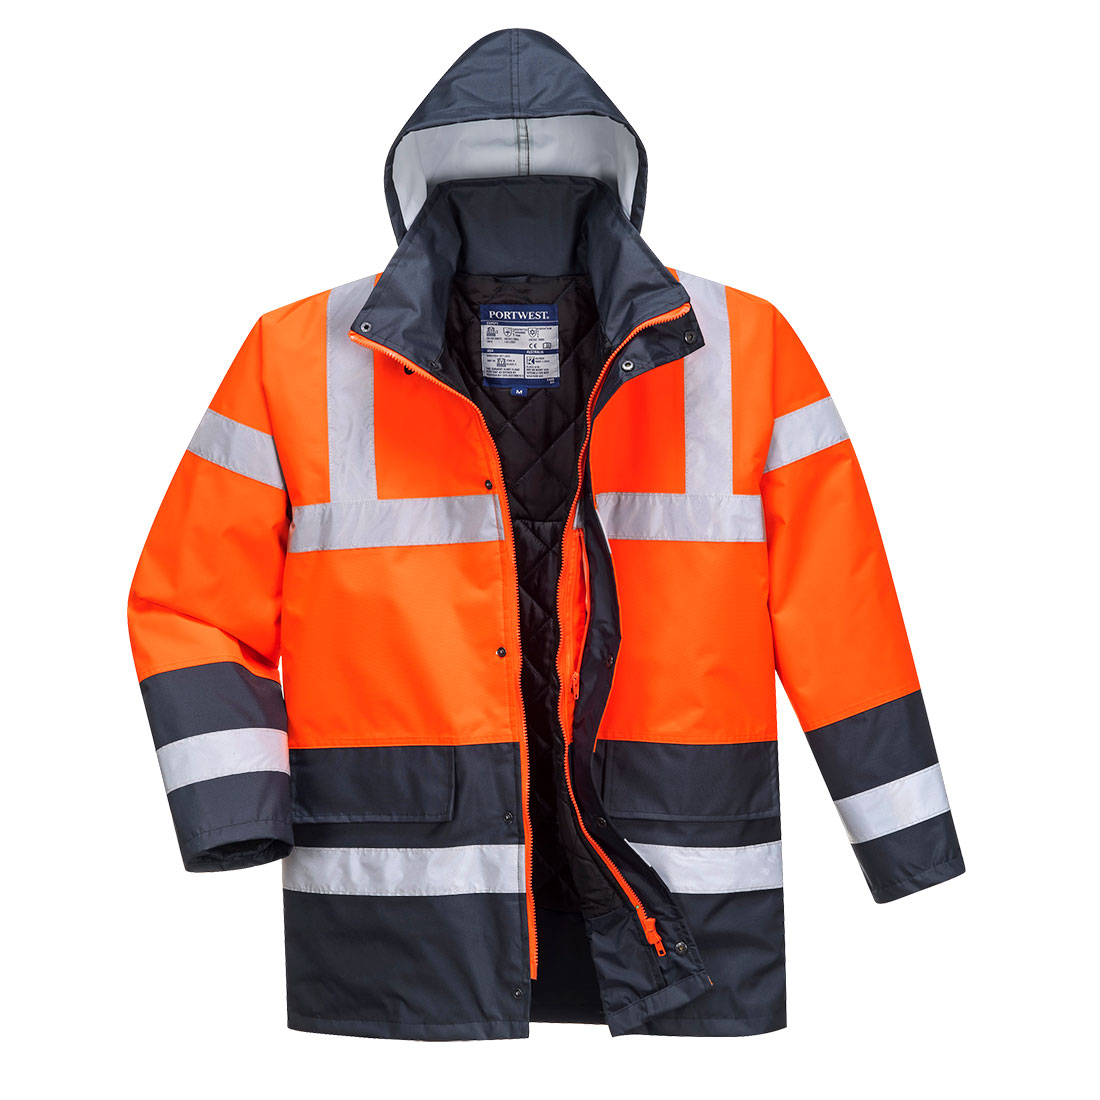 Contrast Traffic Jacket | Workwear, Hi Vis | Embroidery In House